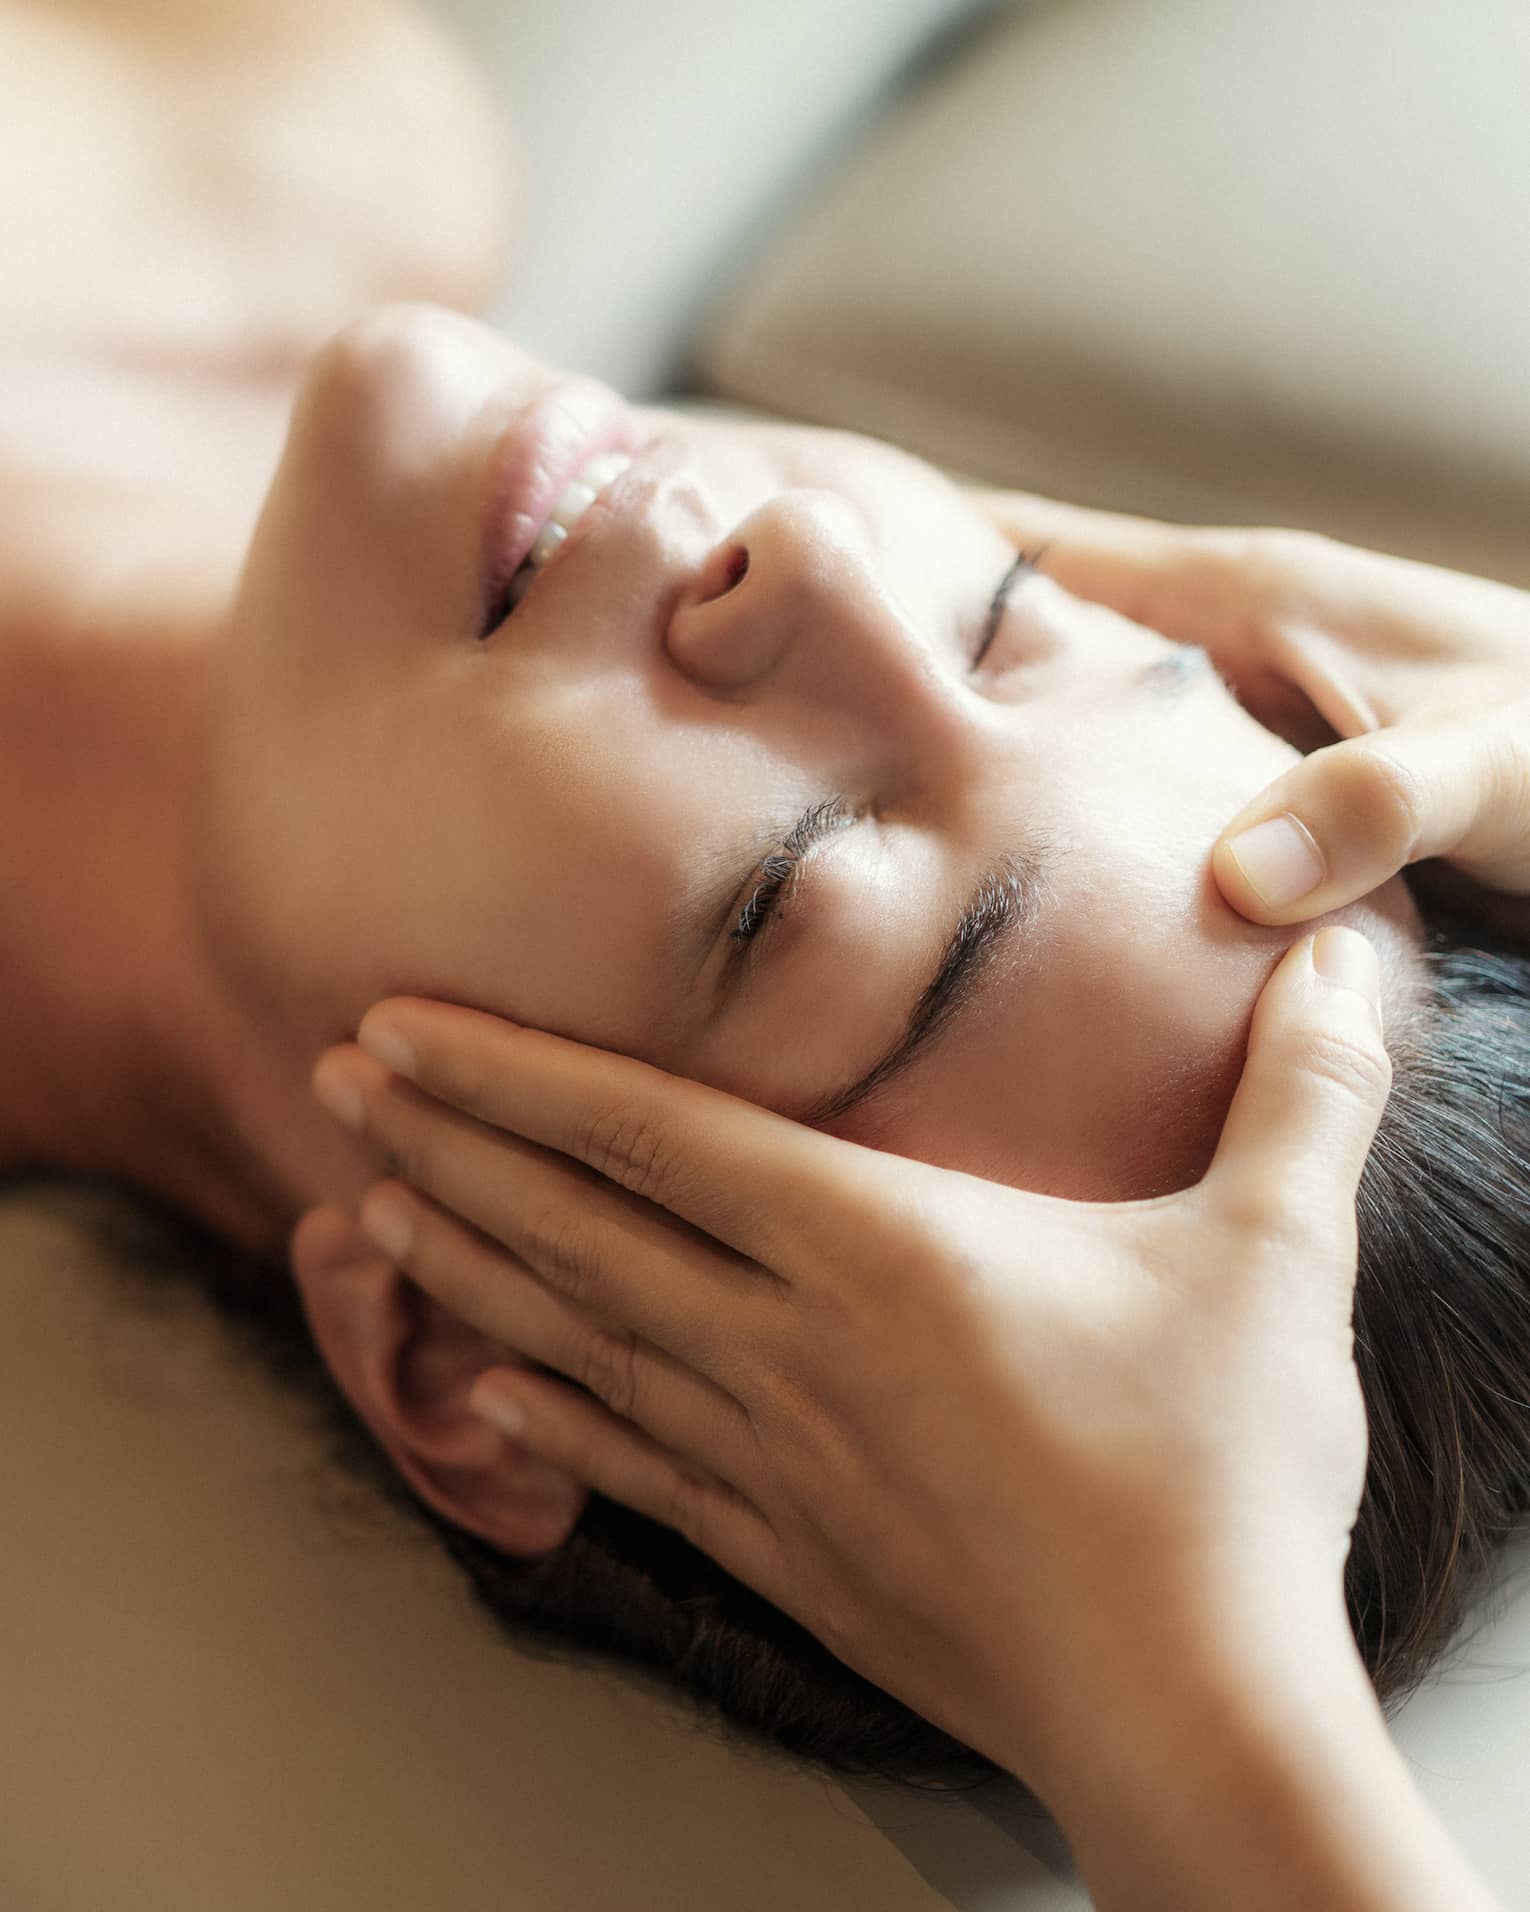 Spa facial, two hands rest on woman's forehead as she closes her eyes, lays under sheet on treatment table